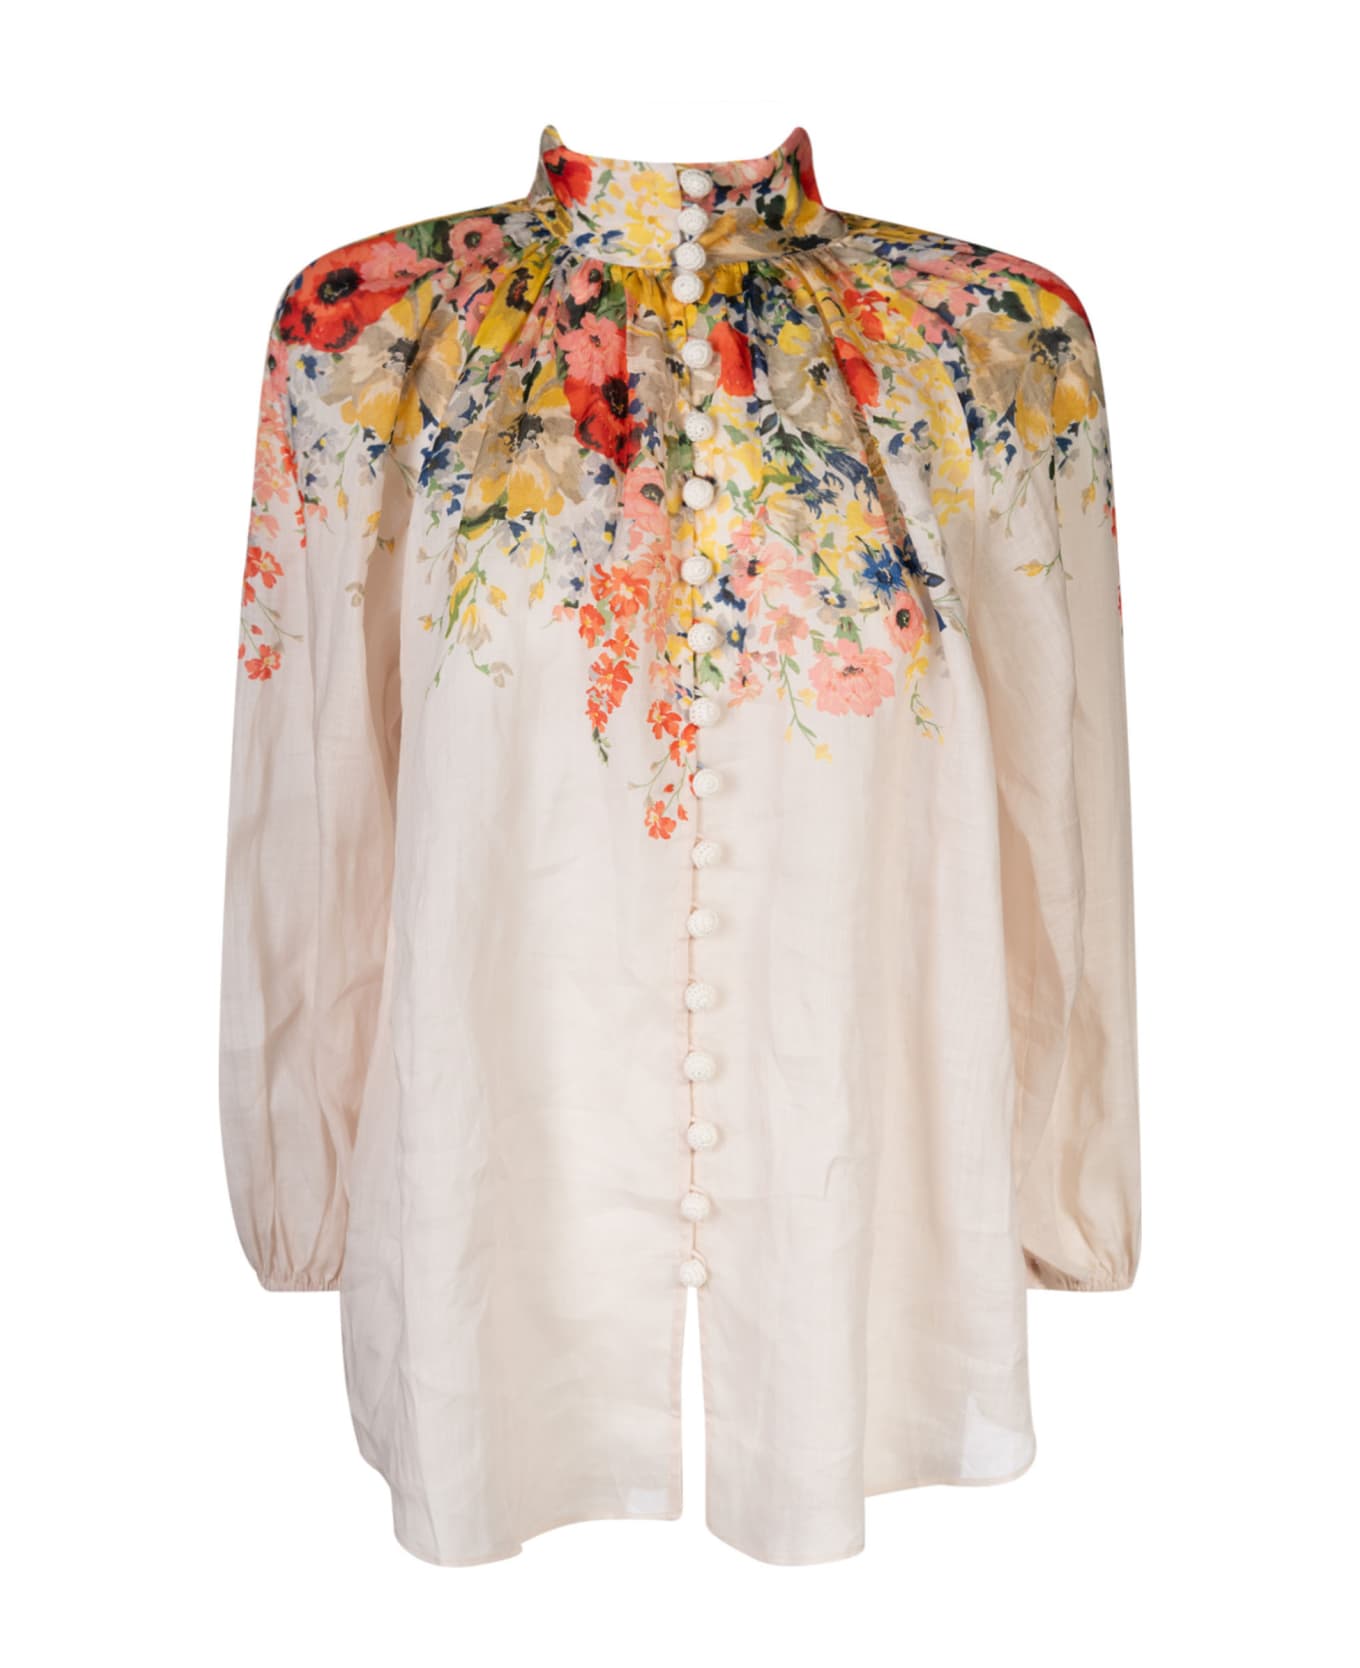 Zimmermann Floral High Neck Blouse - Ivory ブラウス